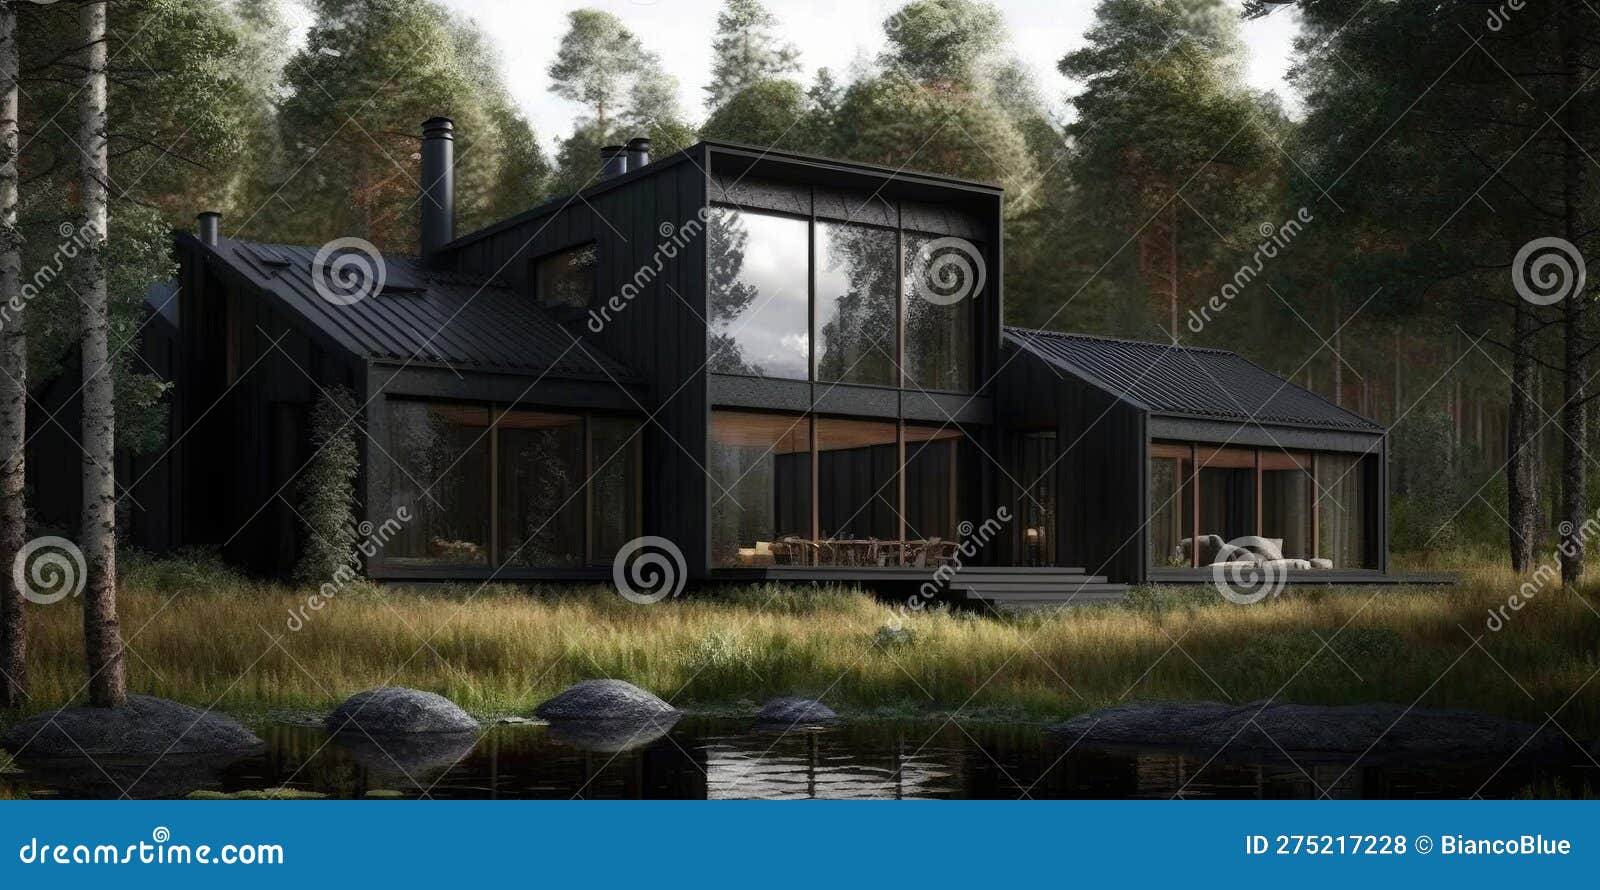 luxurious scandinavian nordic home in the forest in evening scene